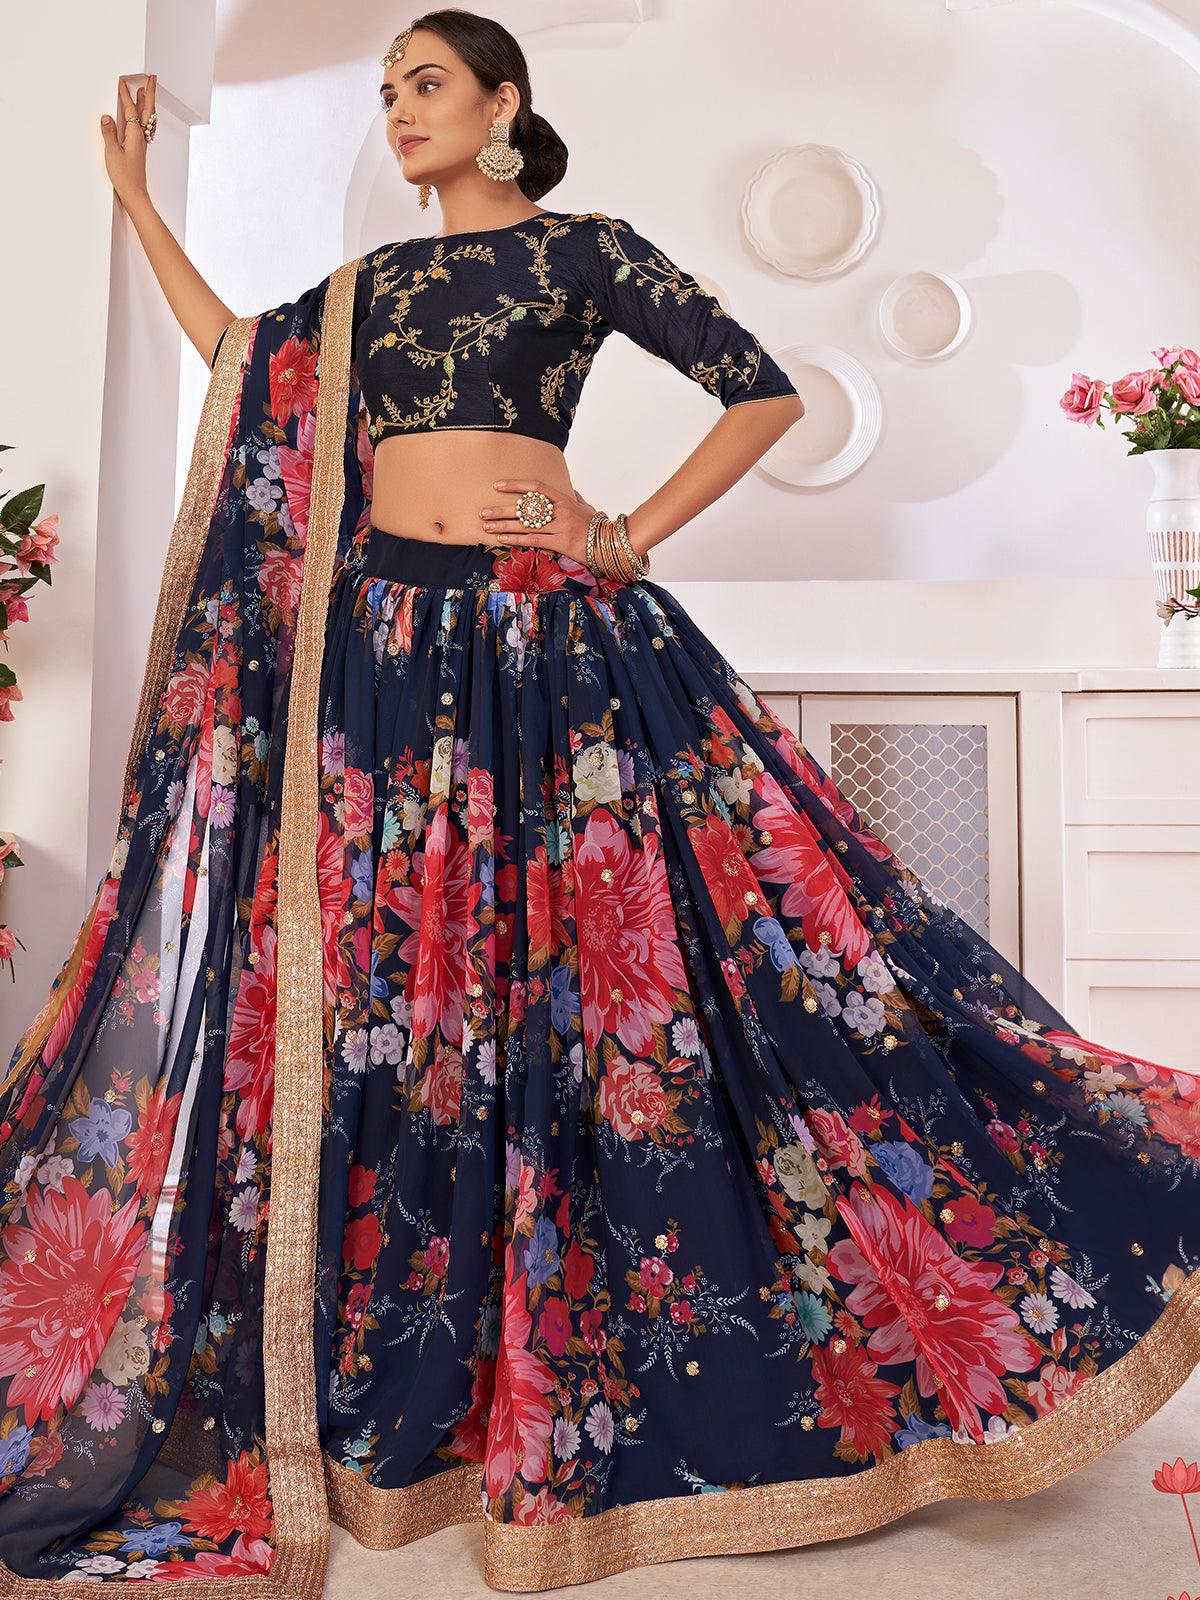 Angalakruthi Boutique - #Floral Lehenga #Sequence work Lehenga #Trendy Crop  top & skirt #ANGALAKRUTHI #Bangalore Boutique #Whats app-8884346333 |  Facebook